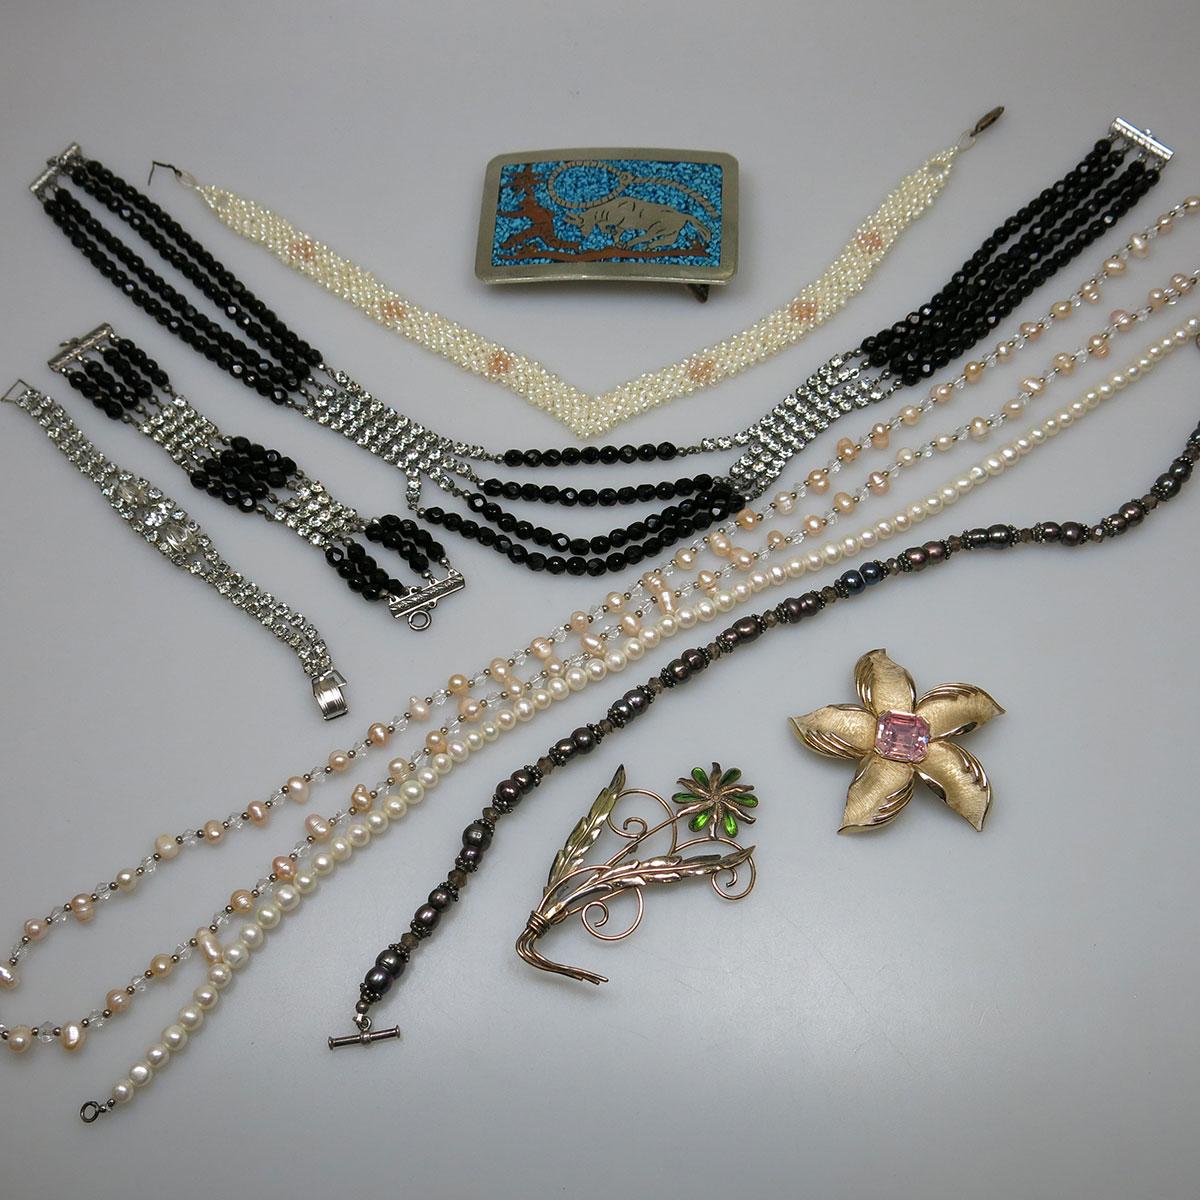 8 Various Fresh Water Pearl Necklaces